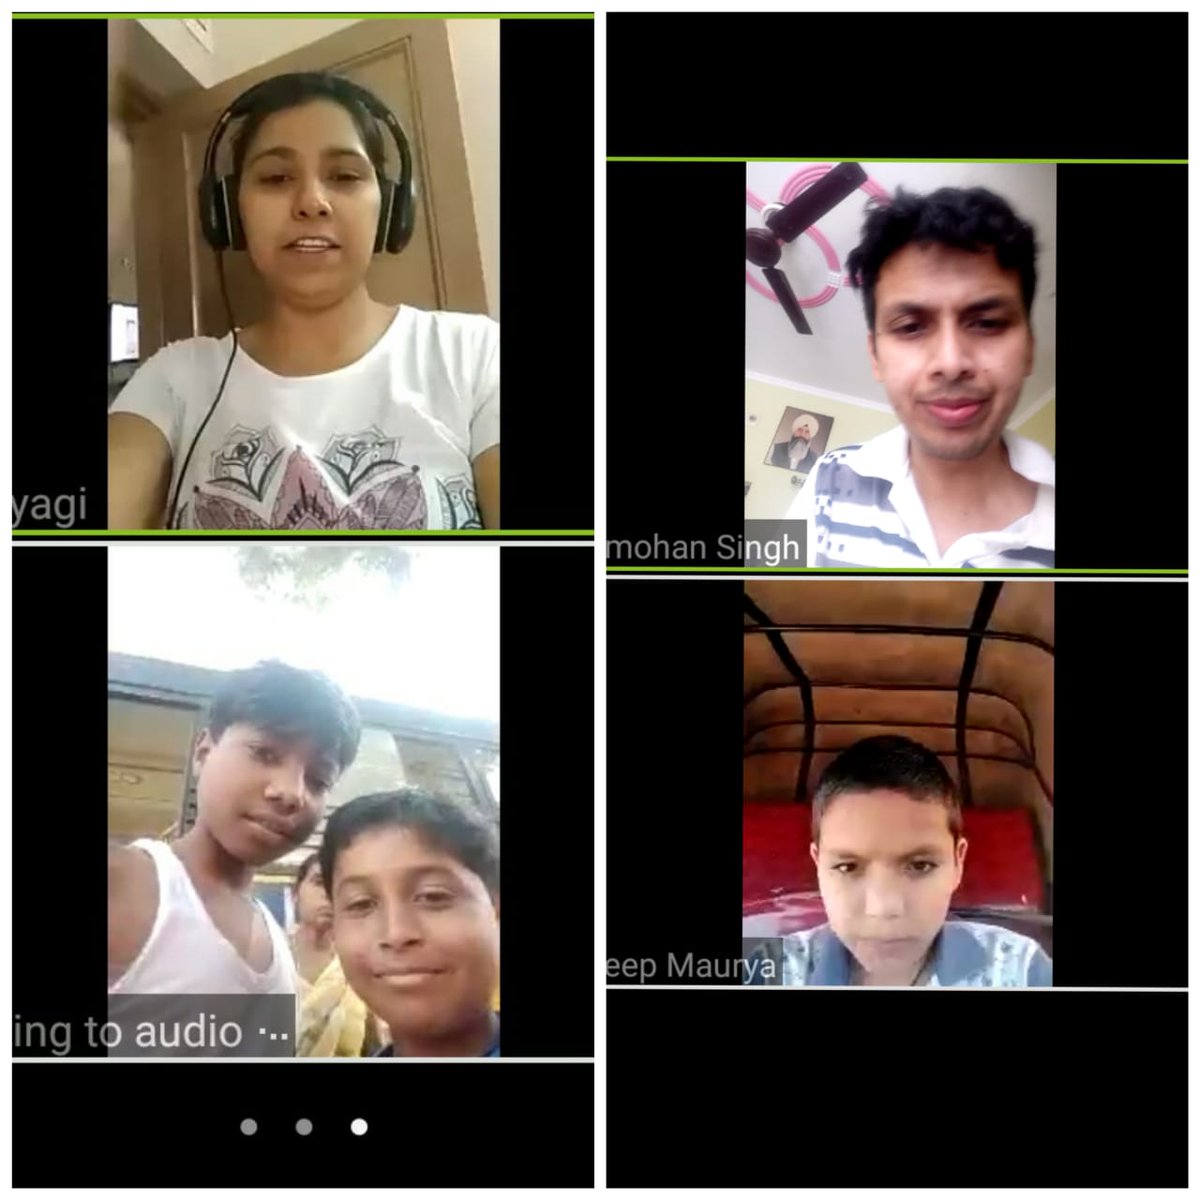 Bridging digital gap in rural areas @NavjyotiIF. The excitement in the kids is magical while the child in second pic figured out better connectivity in his father's auto parked at his house. #bridgingdigitalgap #letsgettechie #DigitalIndia #onlinelearning #FightCOVID19 #edtech